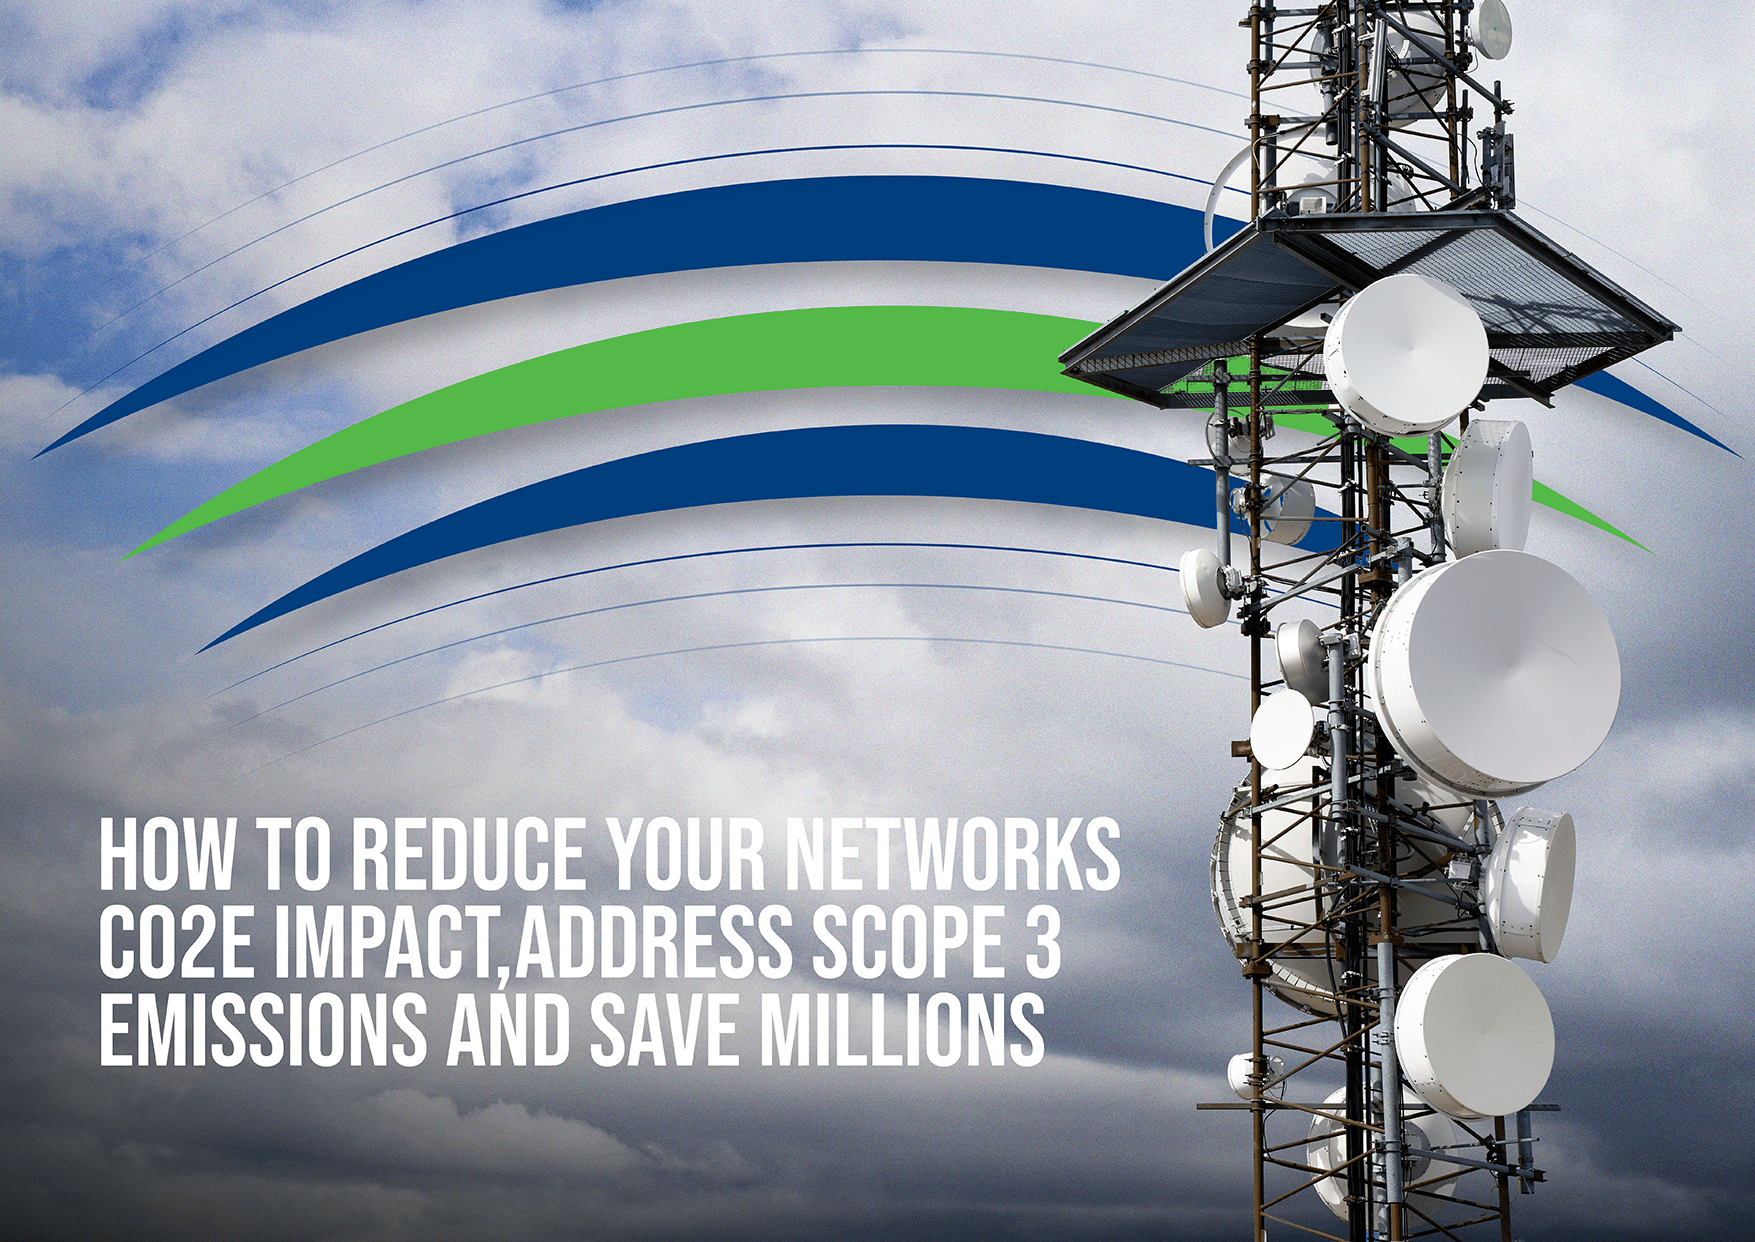 How to reduce your network's CO2e impact, address scope 3 emissions and save millions blog header image